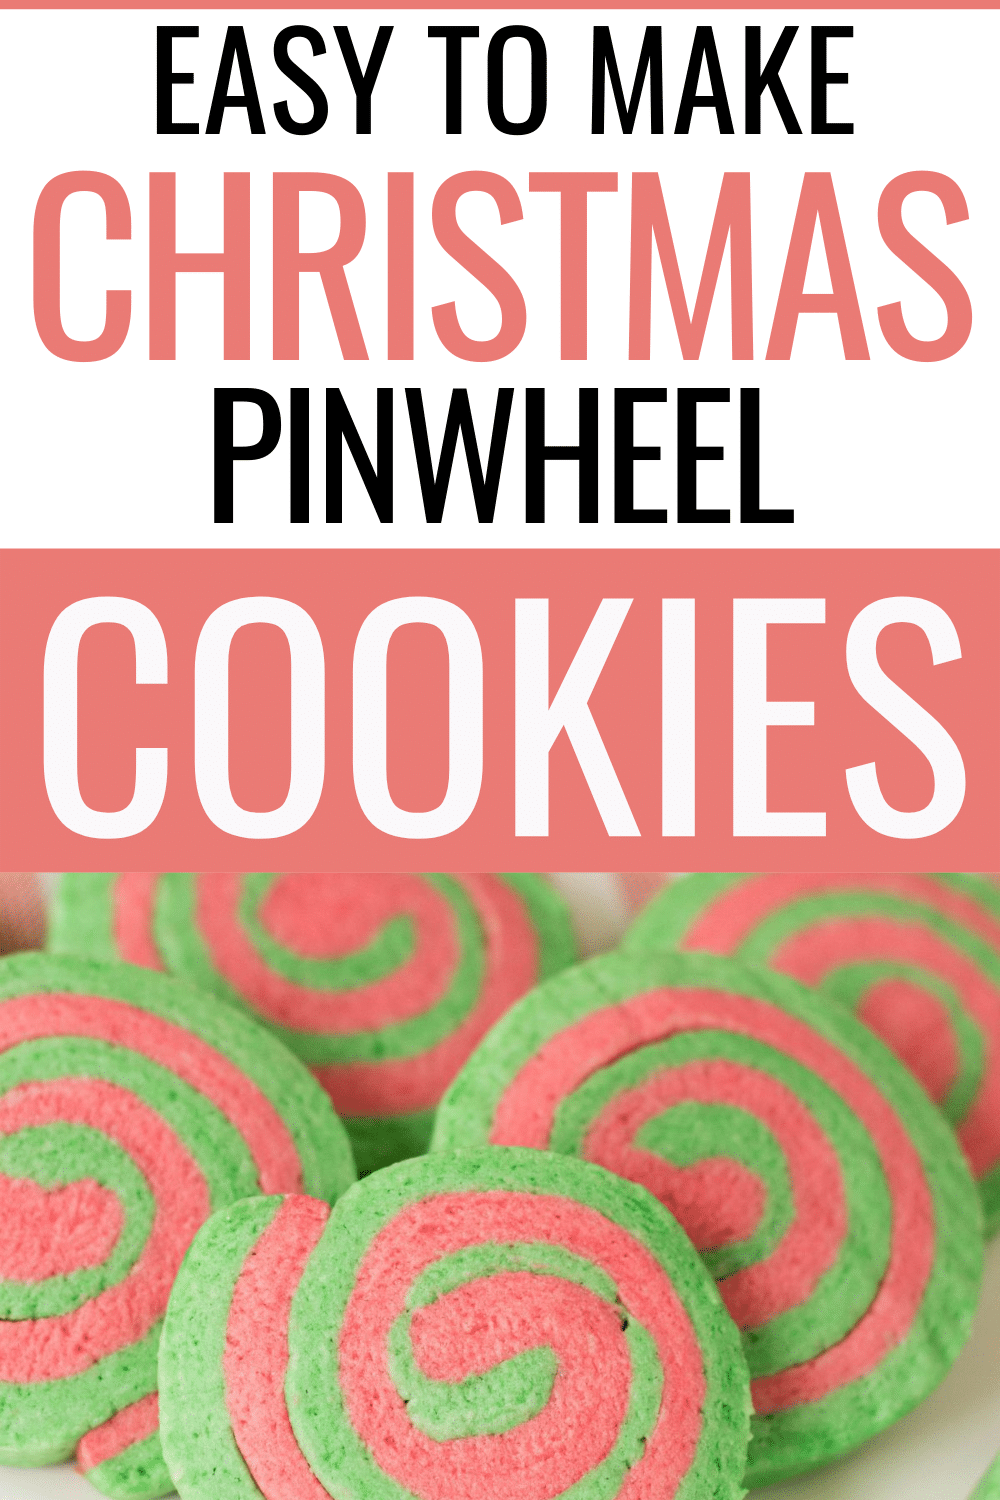 Christmas Pinwheel Cookies are a fun and festive sweet treat. These fun-colored cookies will look amazing on the holiday dessert table. #christmas #pinwheelcookies #cookies #recipes via @wondermomwannab